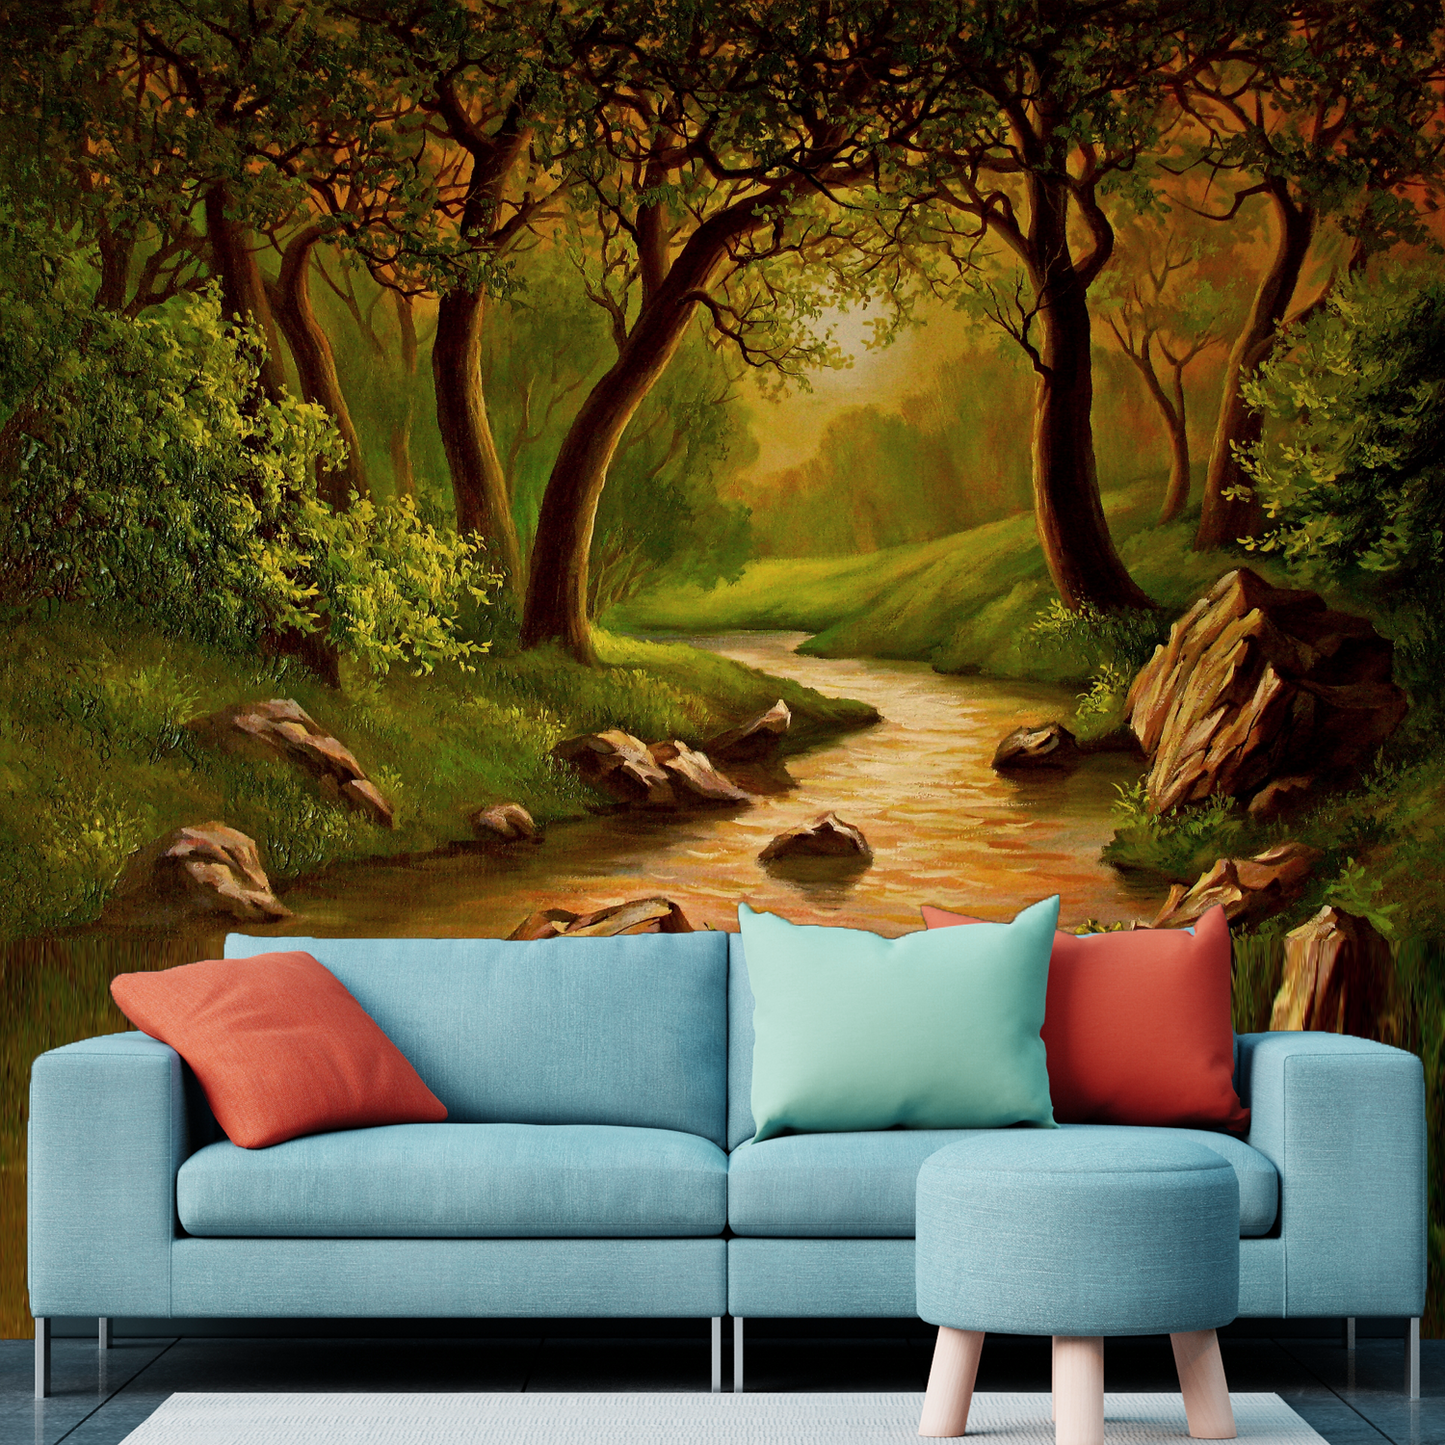 River Forest Painting Premium Quality Wallpaper